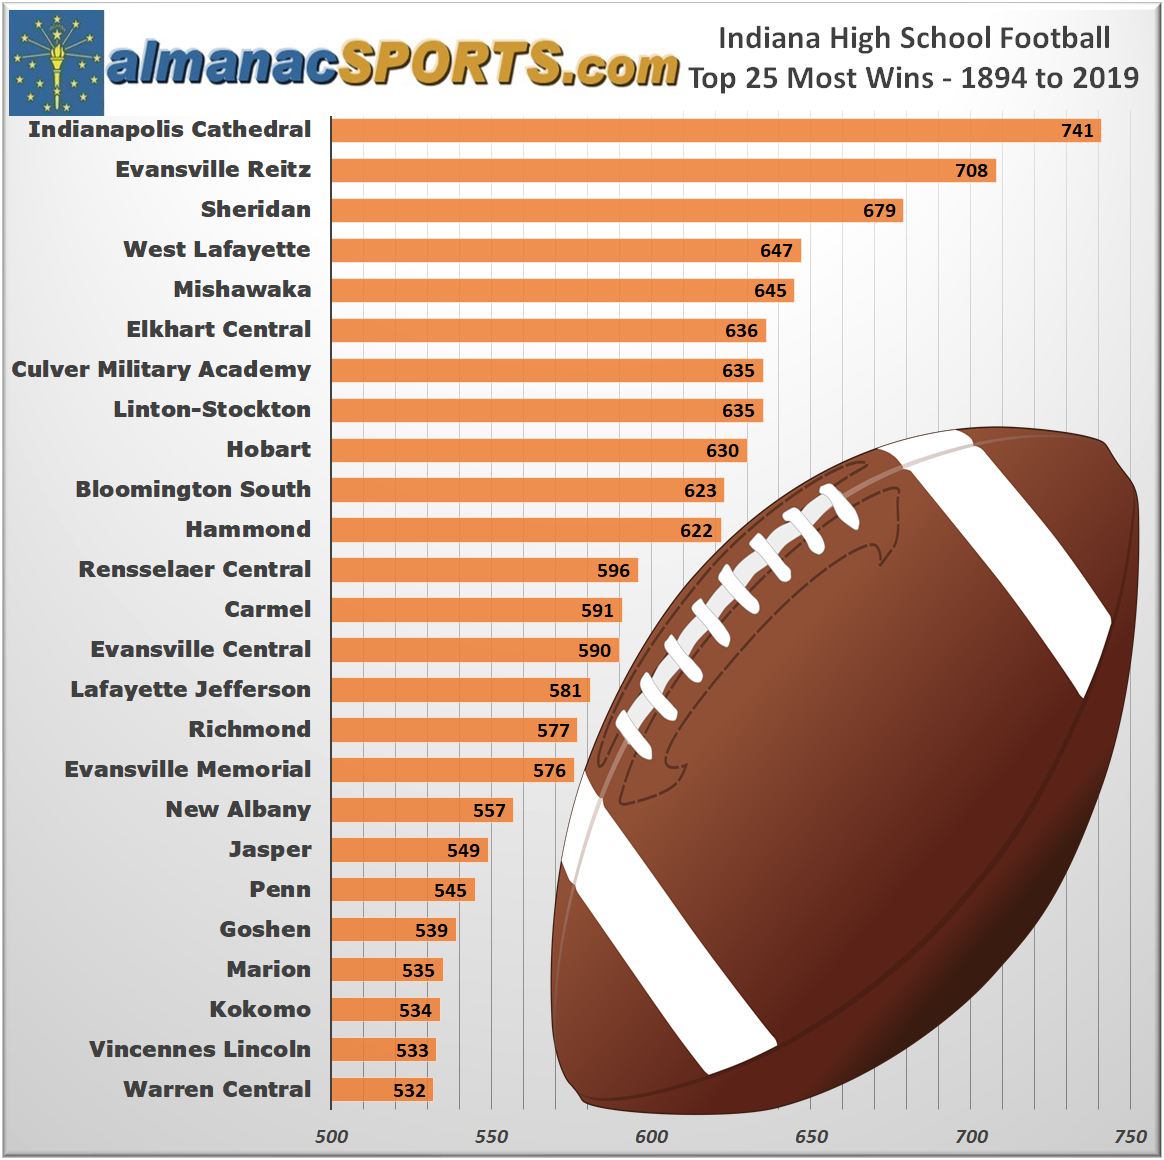 Most wins Top 25 Indiana High School Football teams The Indiana